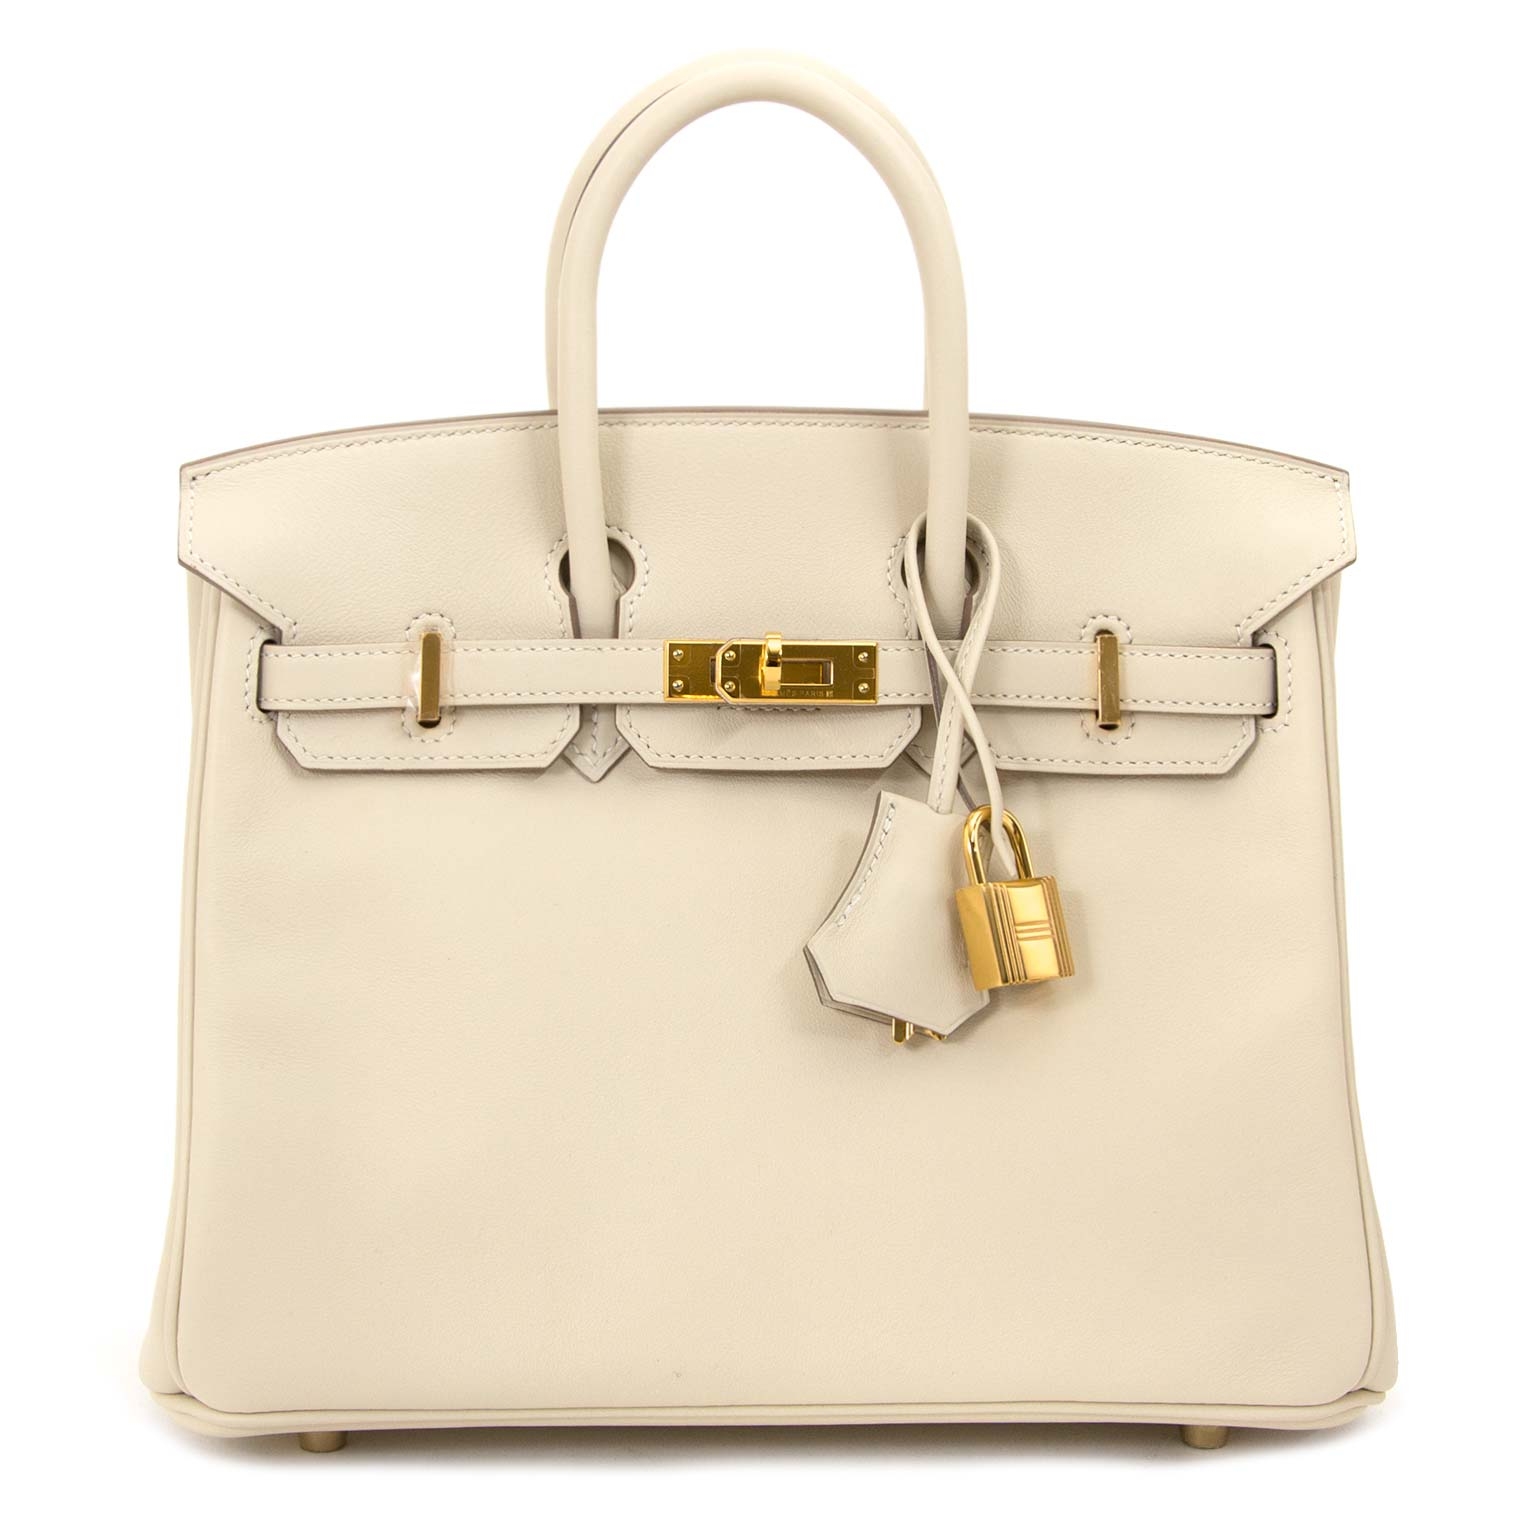 A CRAIE SWIFT LEATHER BIRKIN 25 WITH GOLD HARDWARE